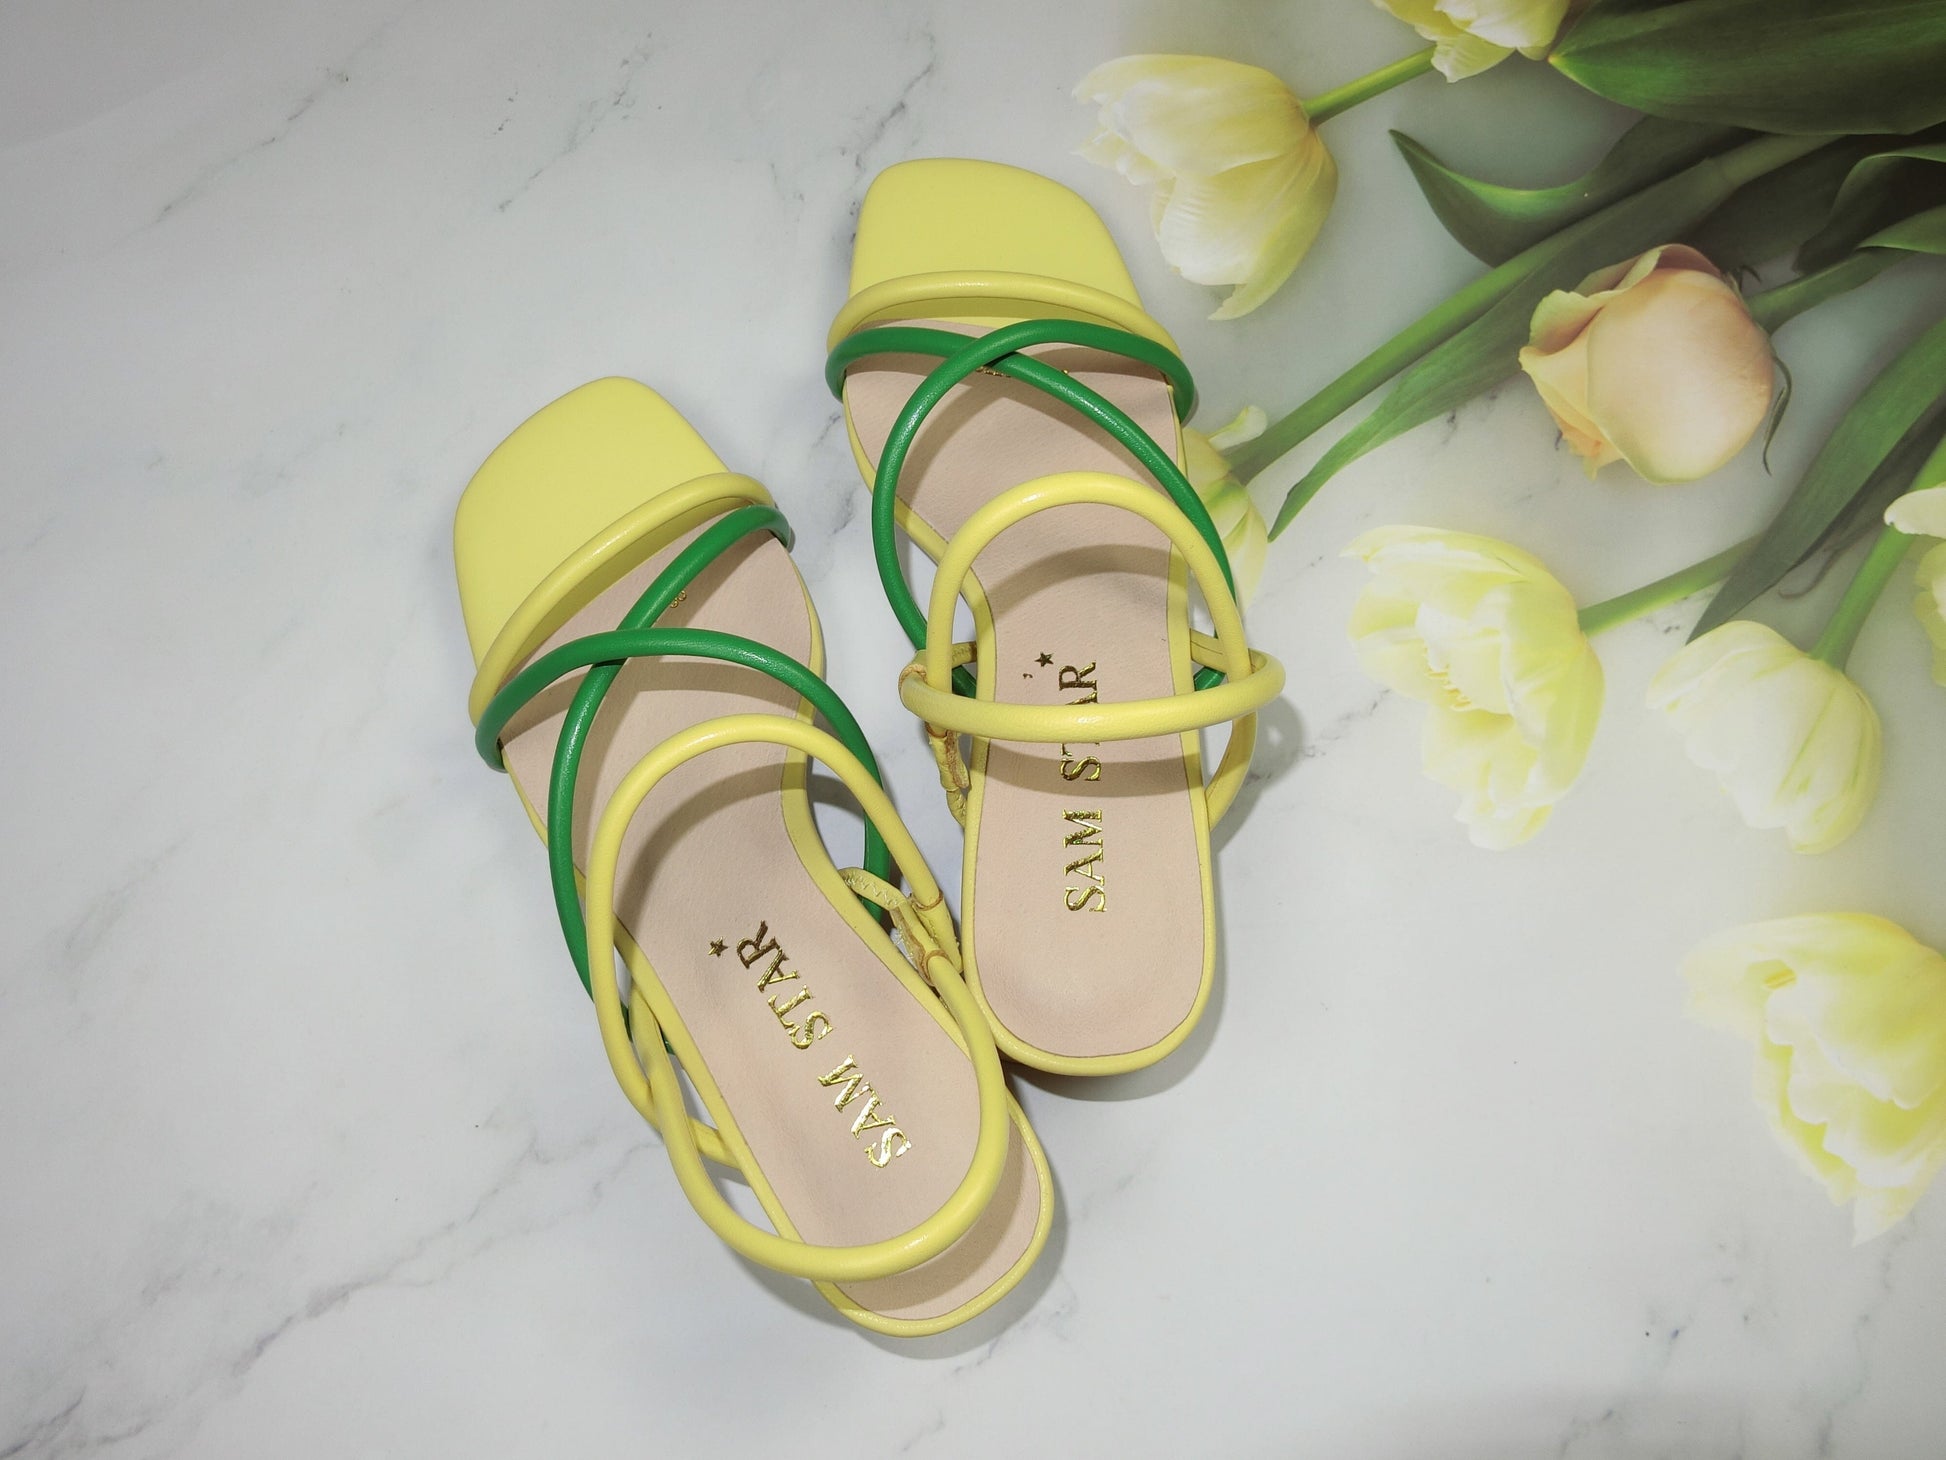 SS22008 Genuine leather strappy block heel sandals in Green and Yellow sandals Sam Star Shoes Green/Yellow 40/7 